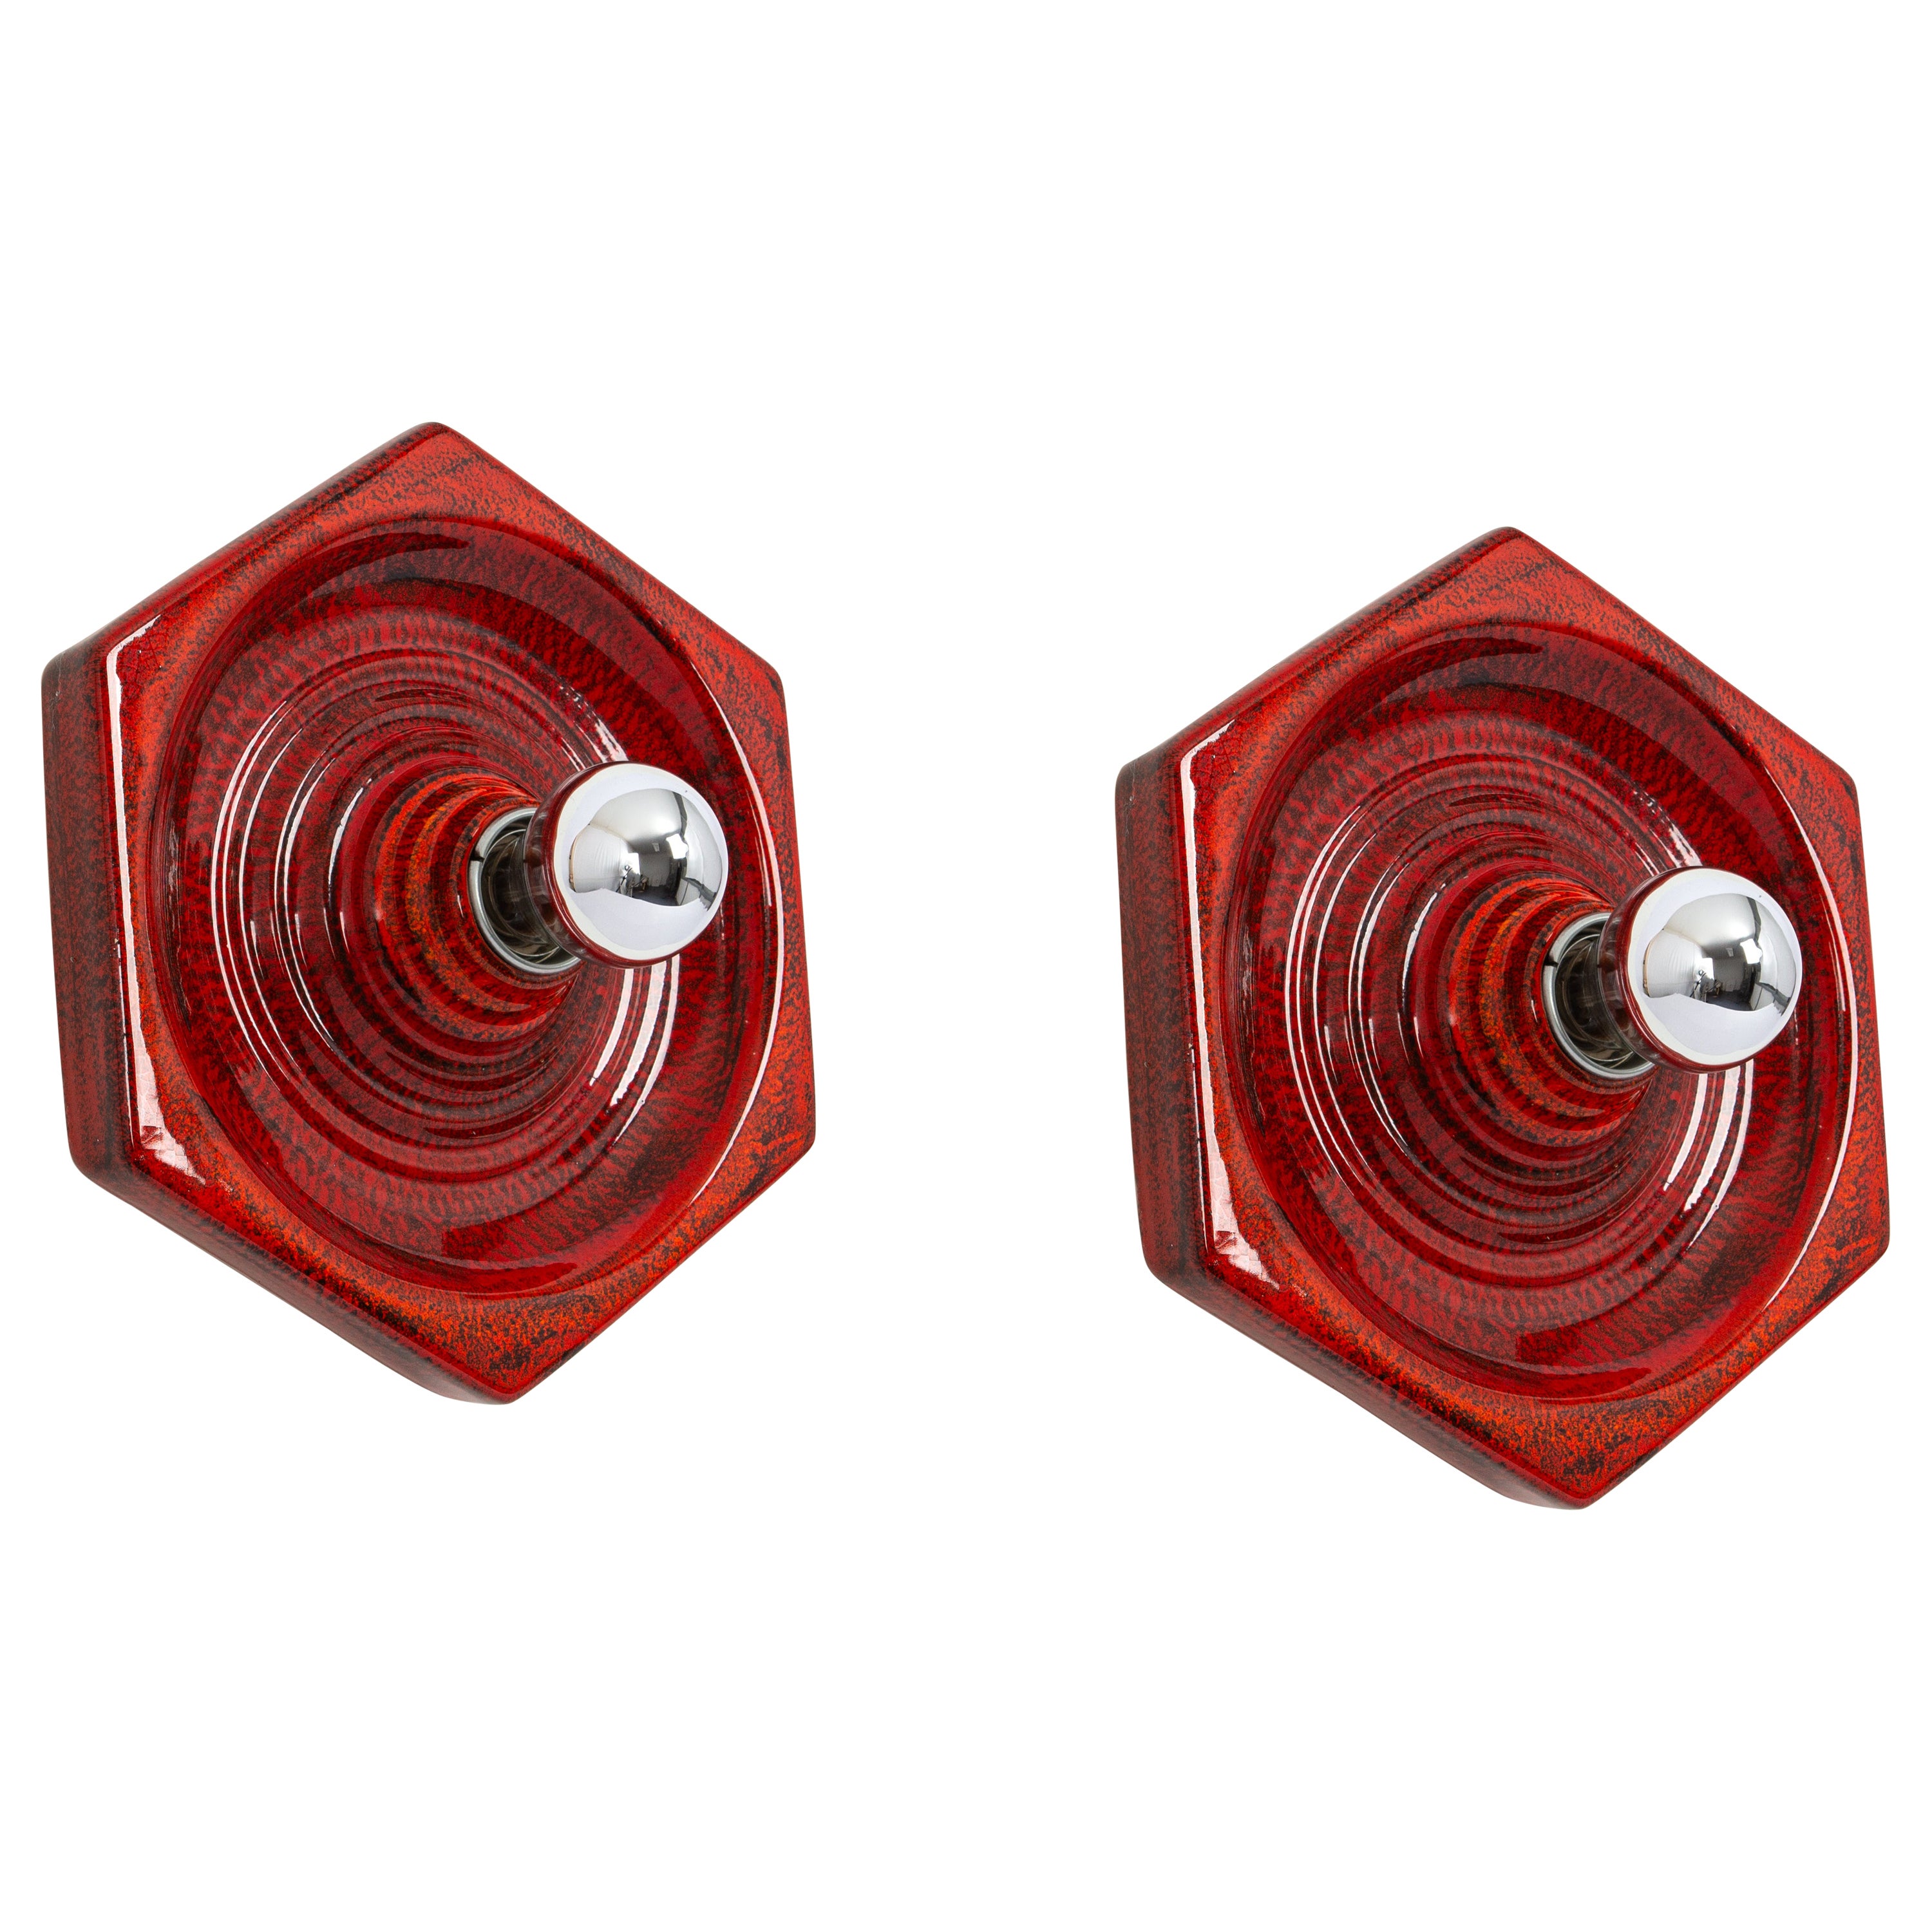 Pair of Ceramic Red and Orange Wall Lights, Germany, 1970s